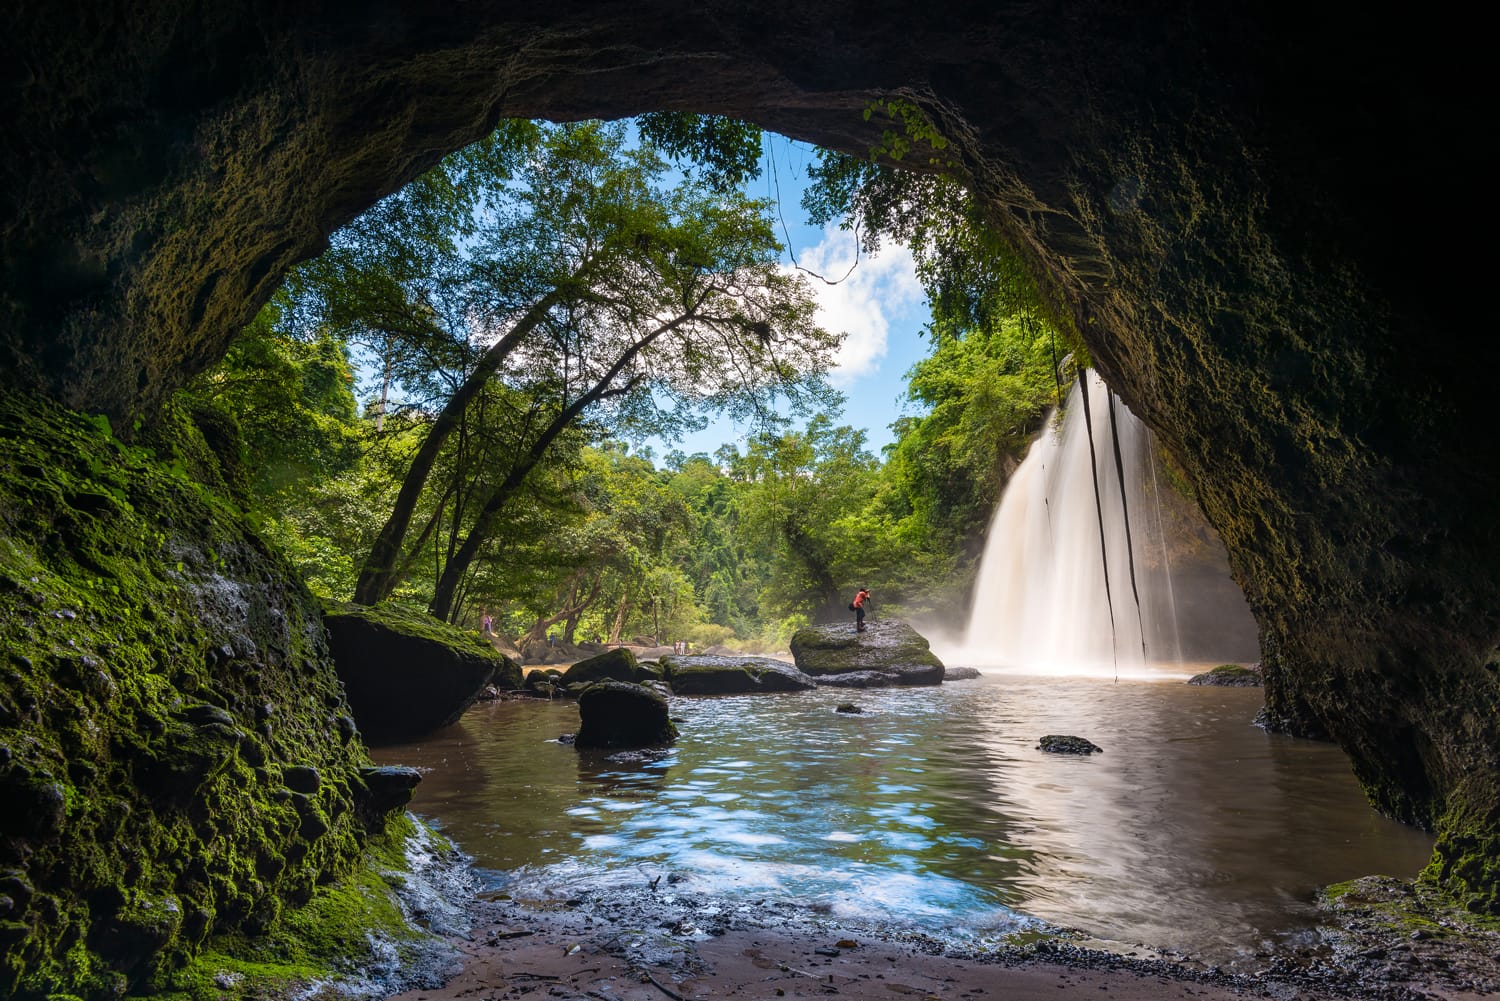 Cave under Heo Suwat Waterfall in Khao Yai National Park in Thailand.